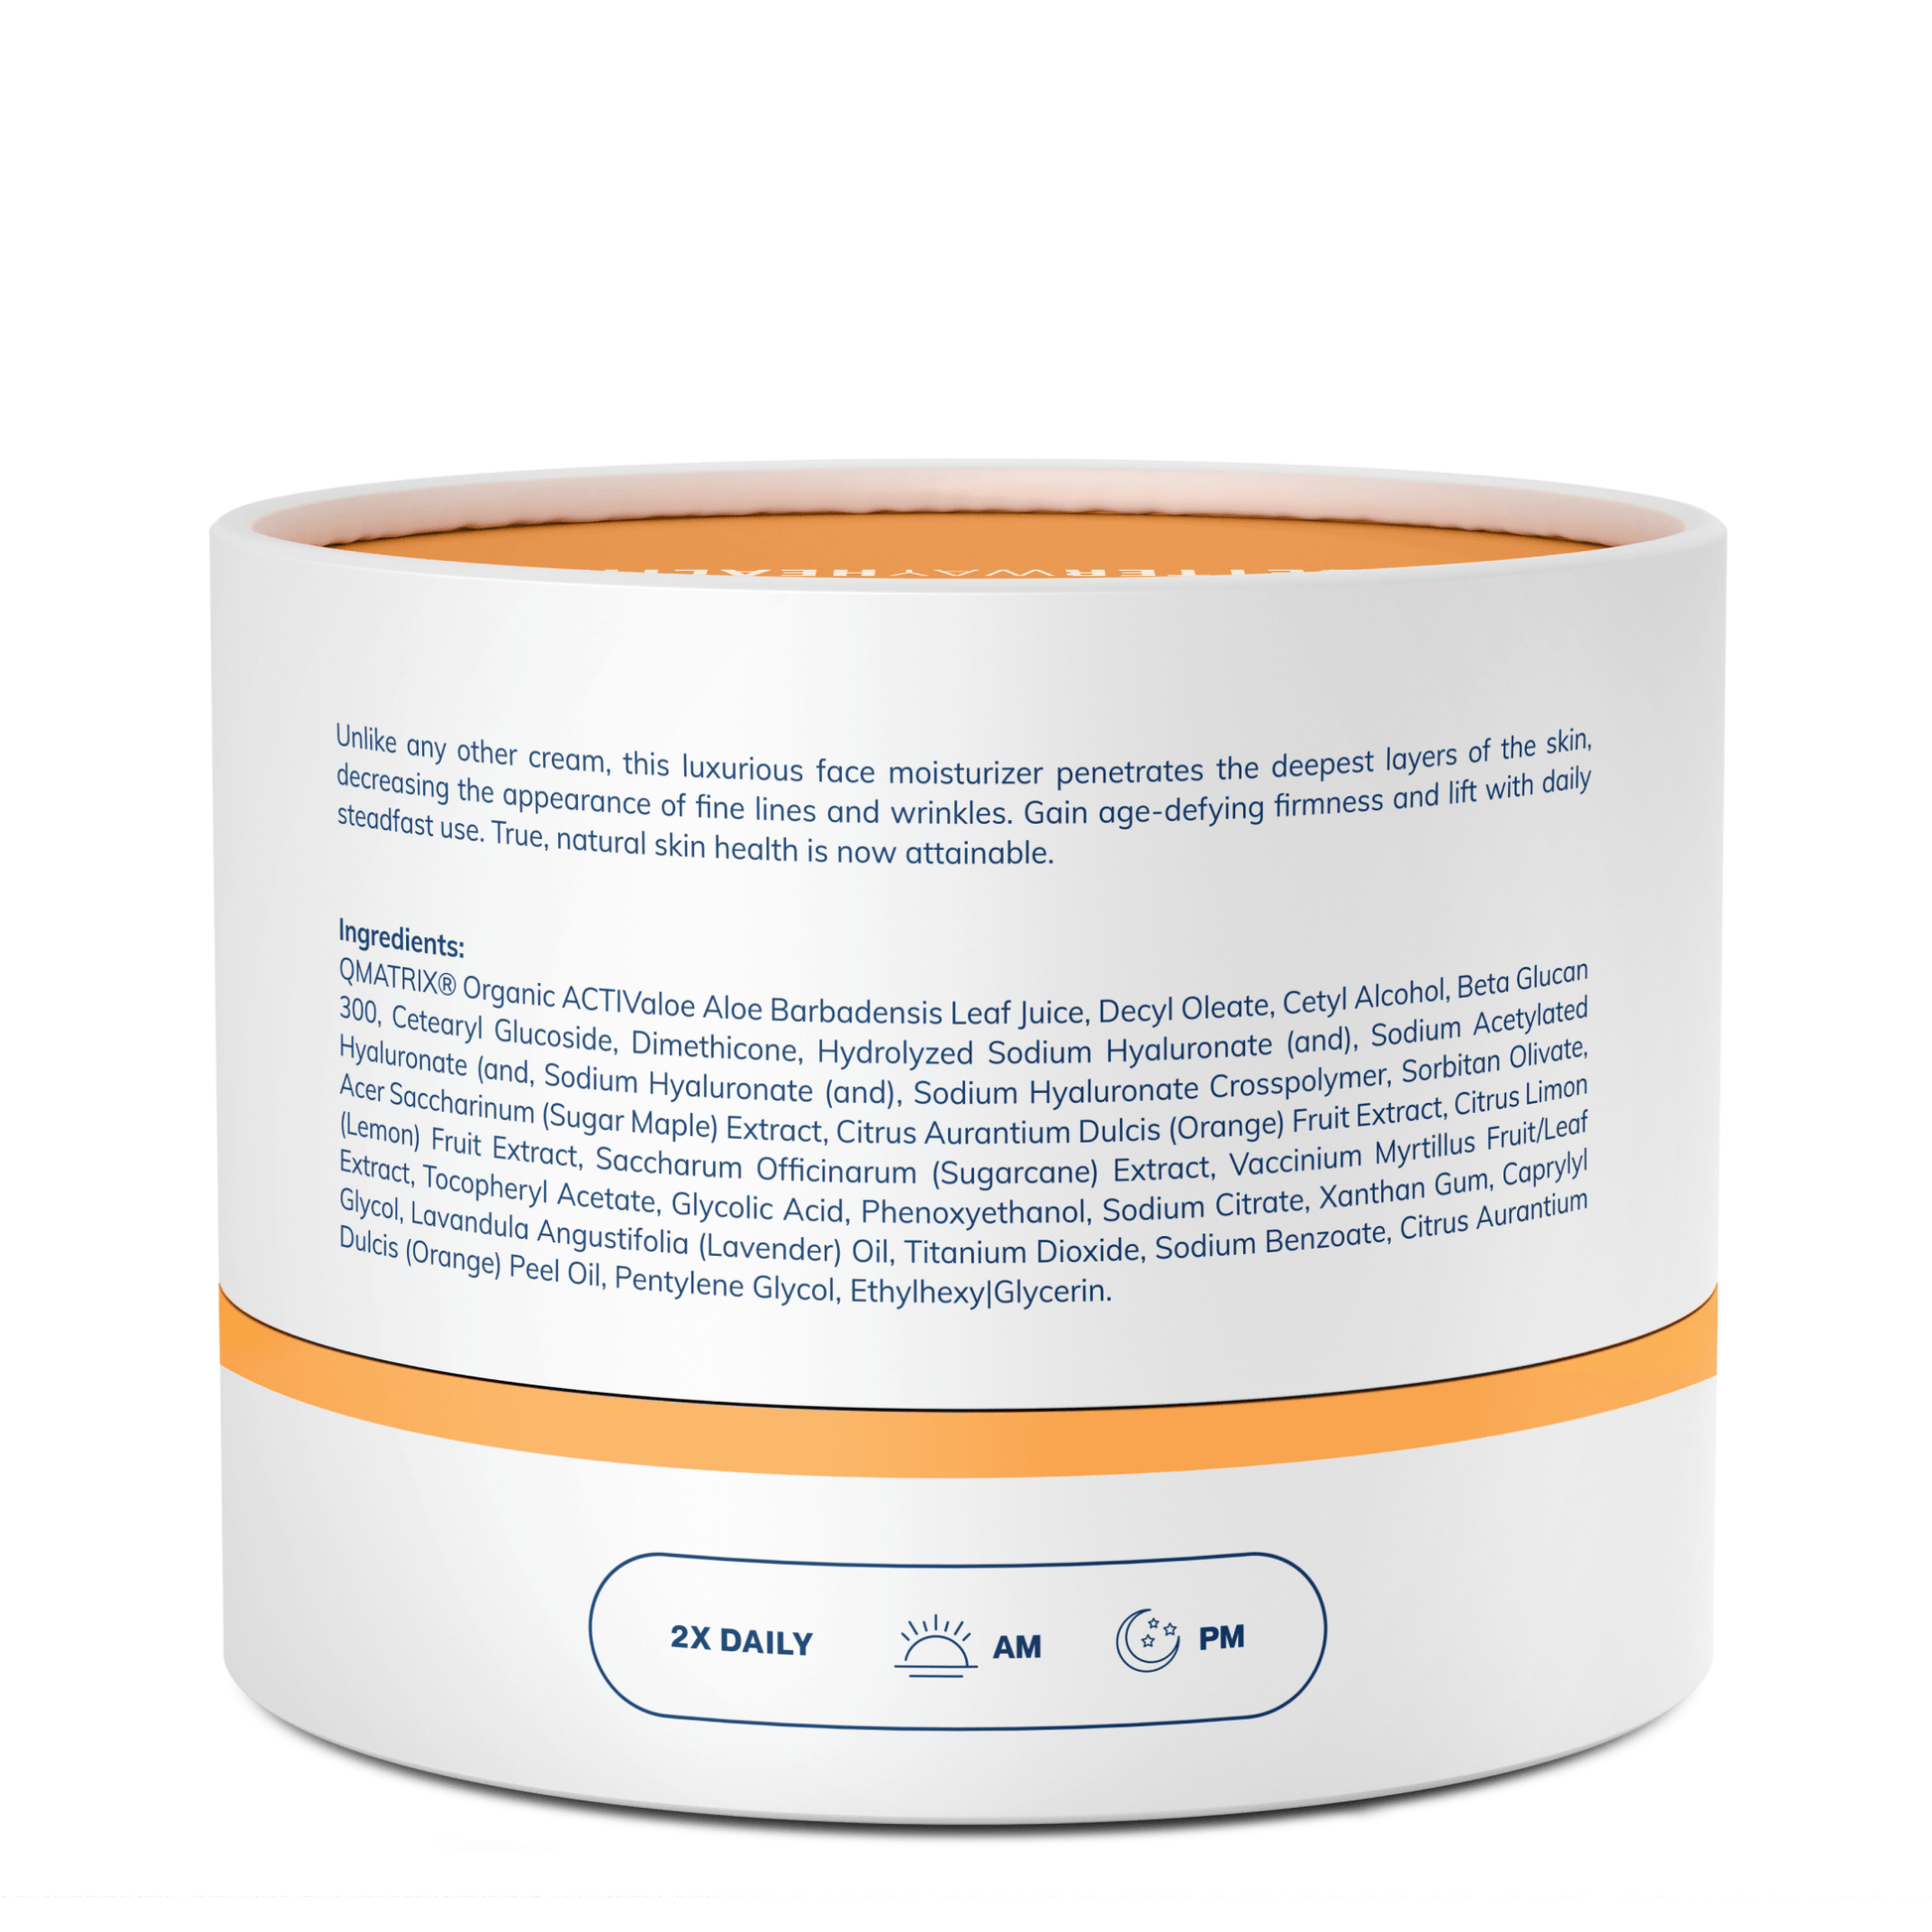 pack shot outlining all of the ingredients within the beta glucan cream